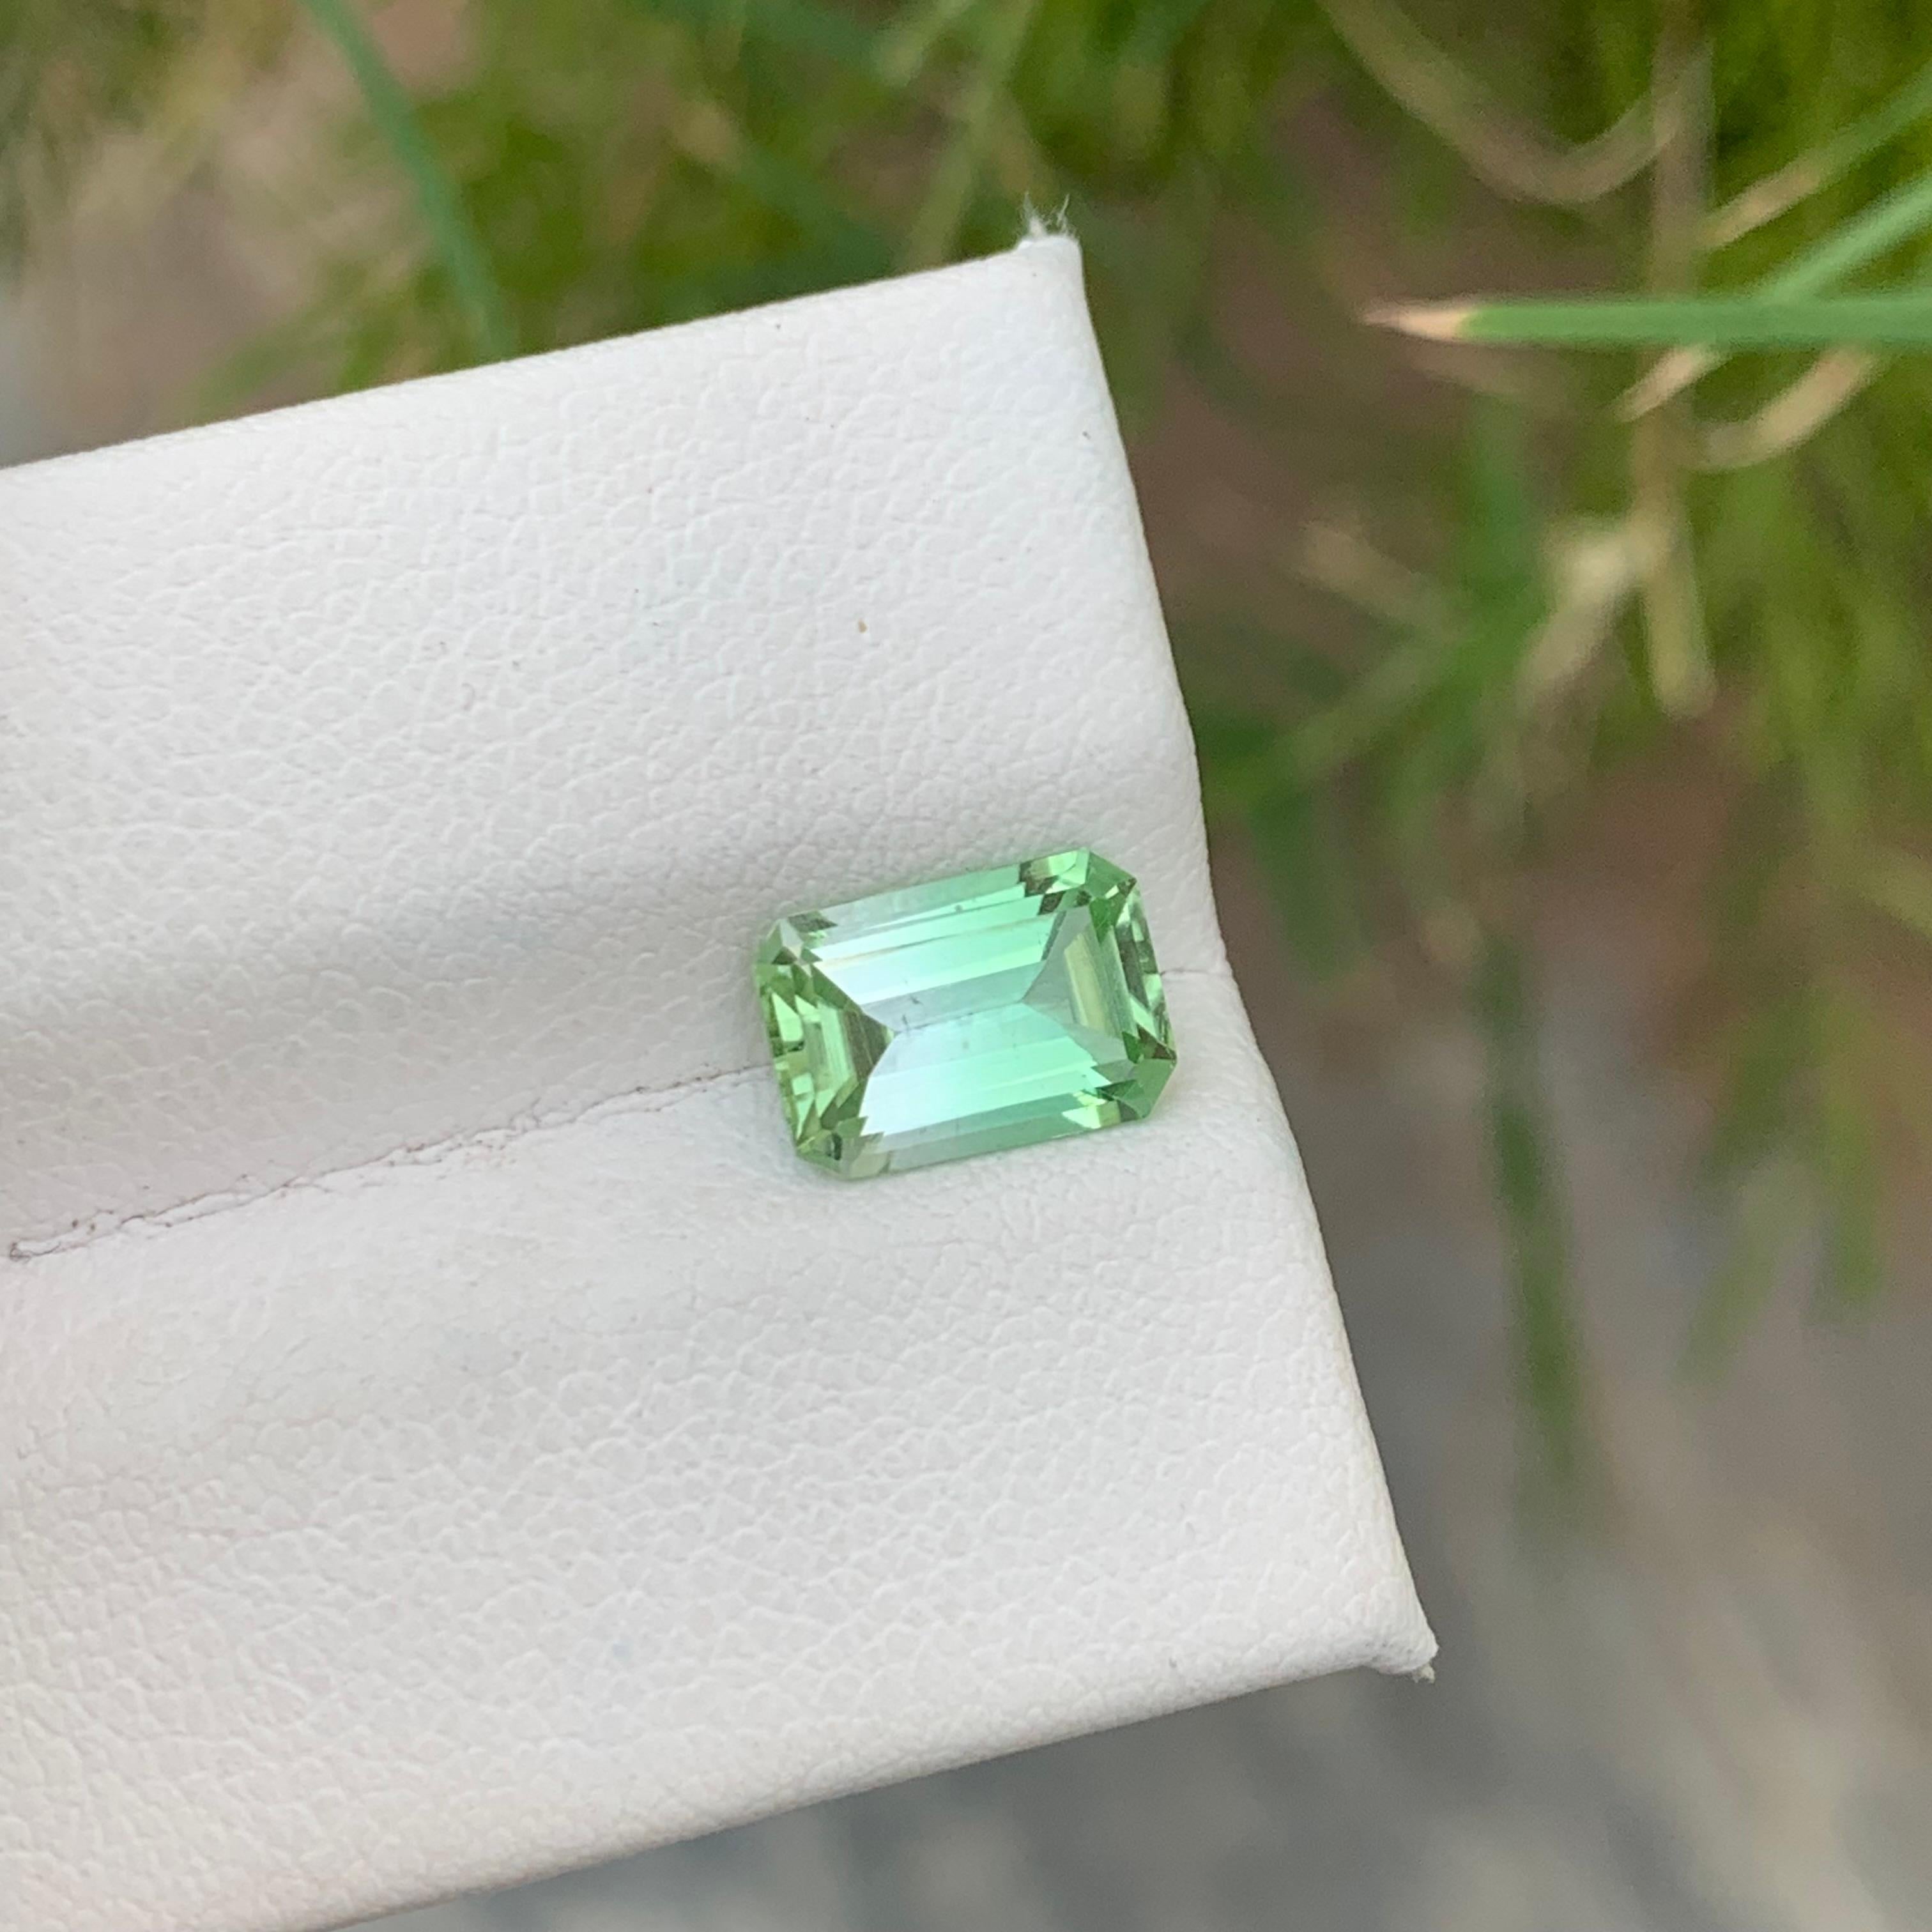 Gorgeous Natural Loose Mint Green Tourmaline Emerald Cut Ring Gemstone 2.0 Carat For Sale 2